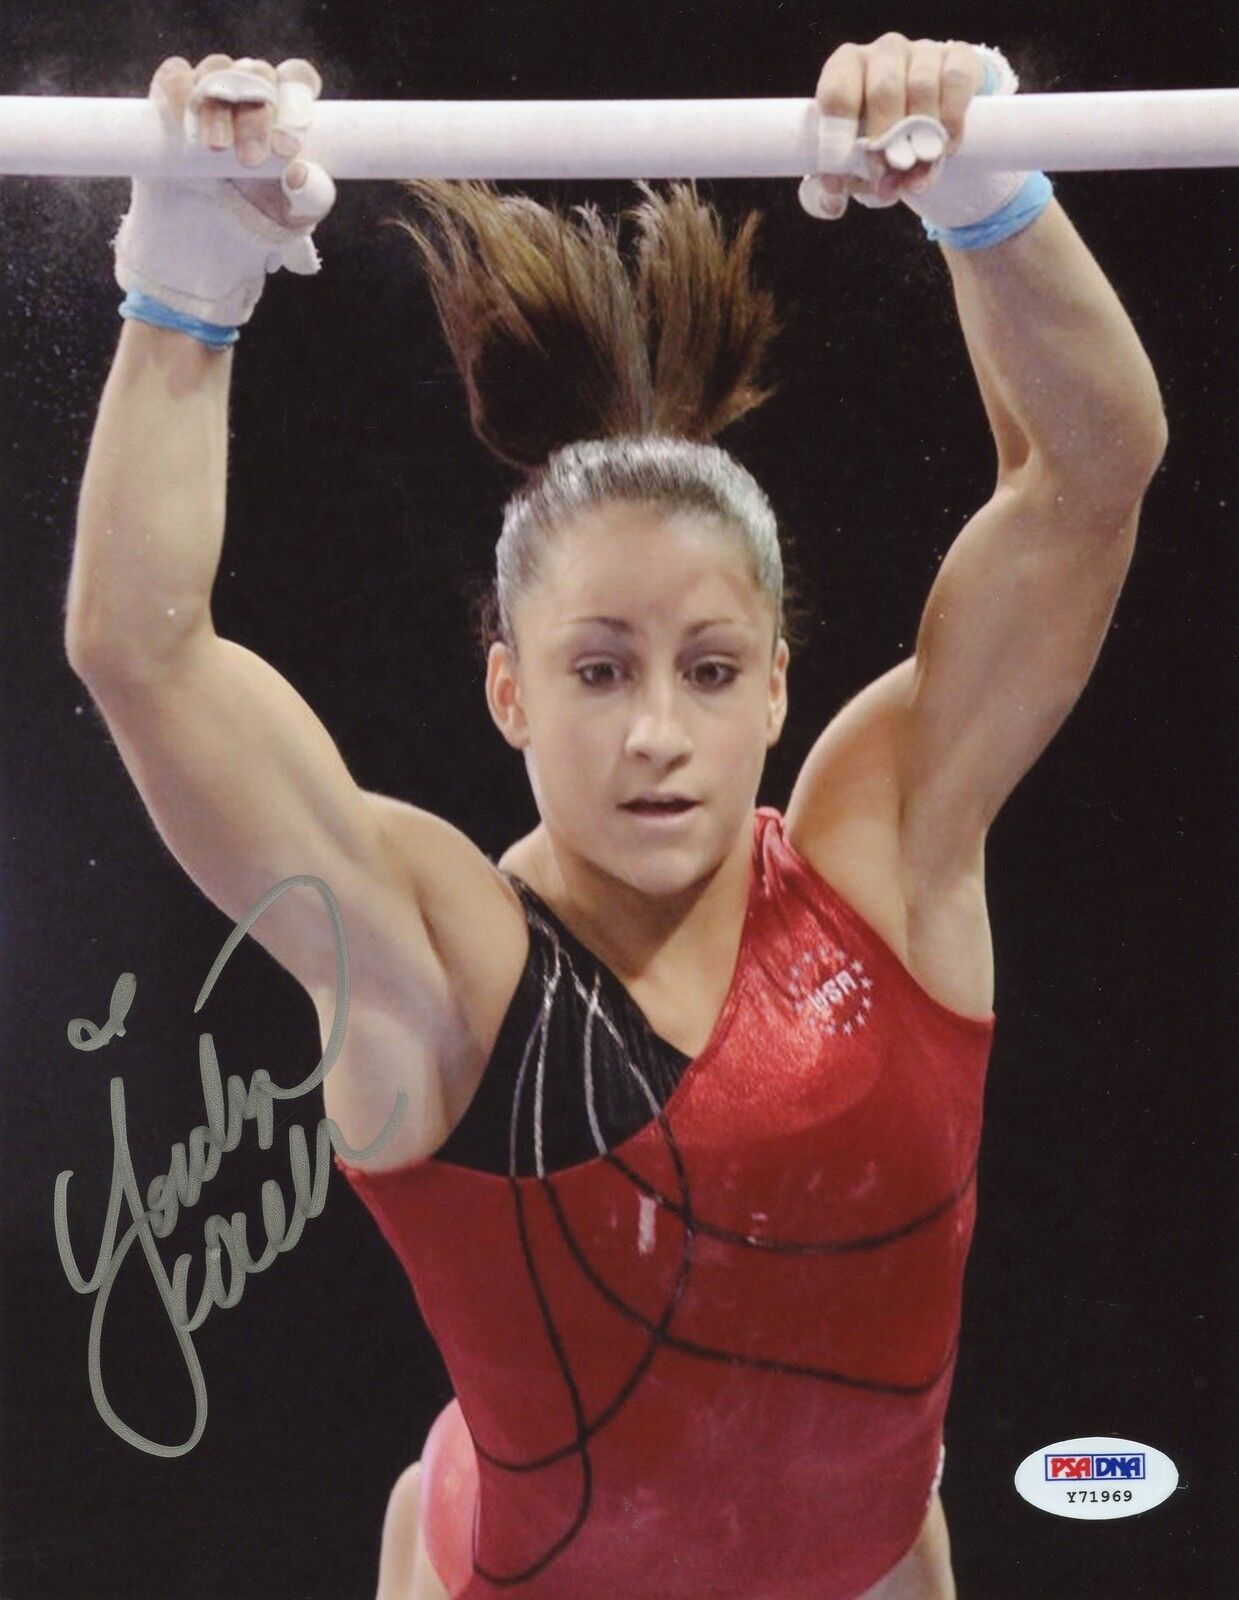 Jordyn Wieber 8x10 Photo Poster painting Signed Autographed Auto PSA DNA Olympic Gold Gymnast